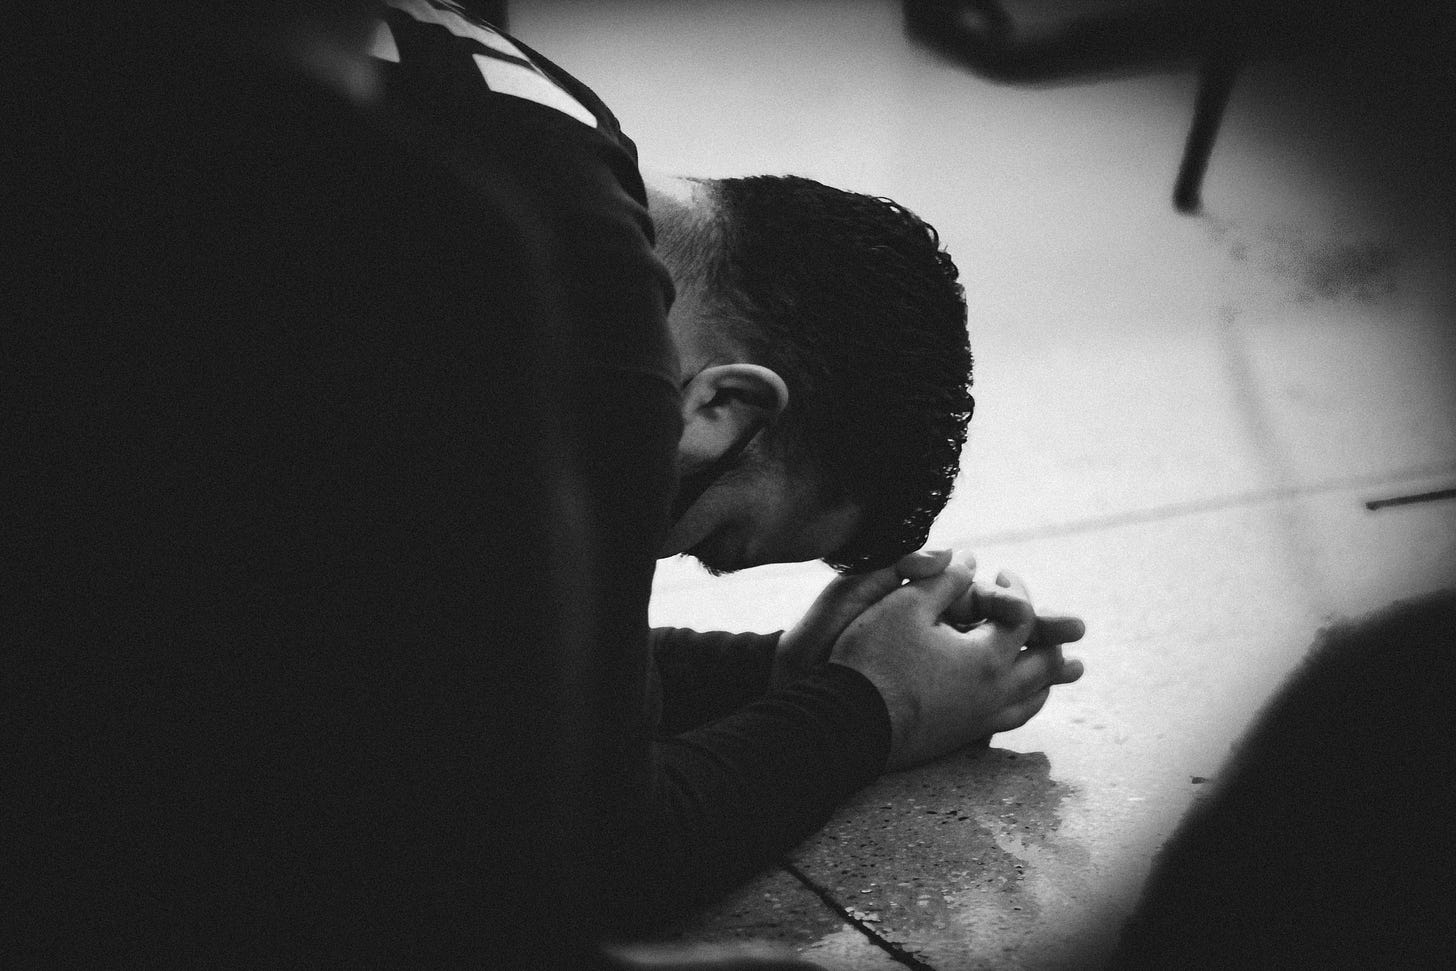 B&W image of a young man bowing on the floor, hands folded in prayer.